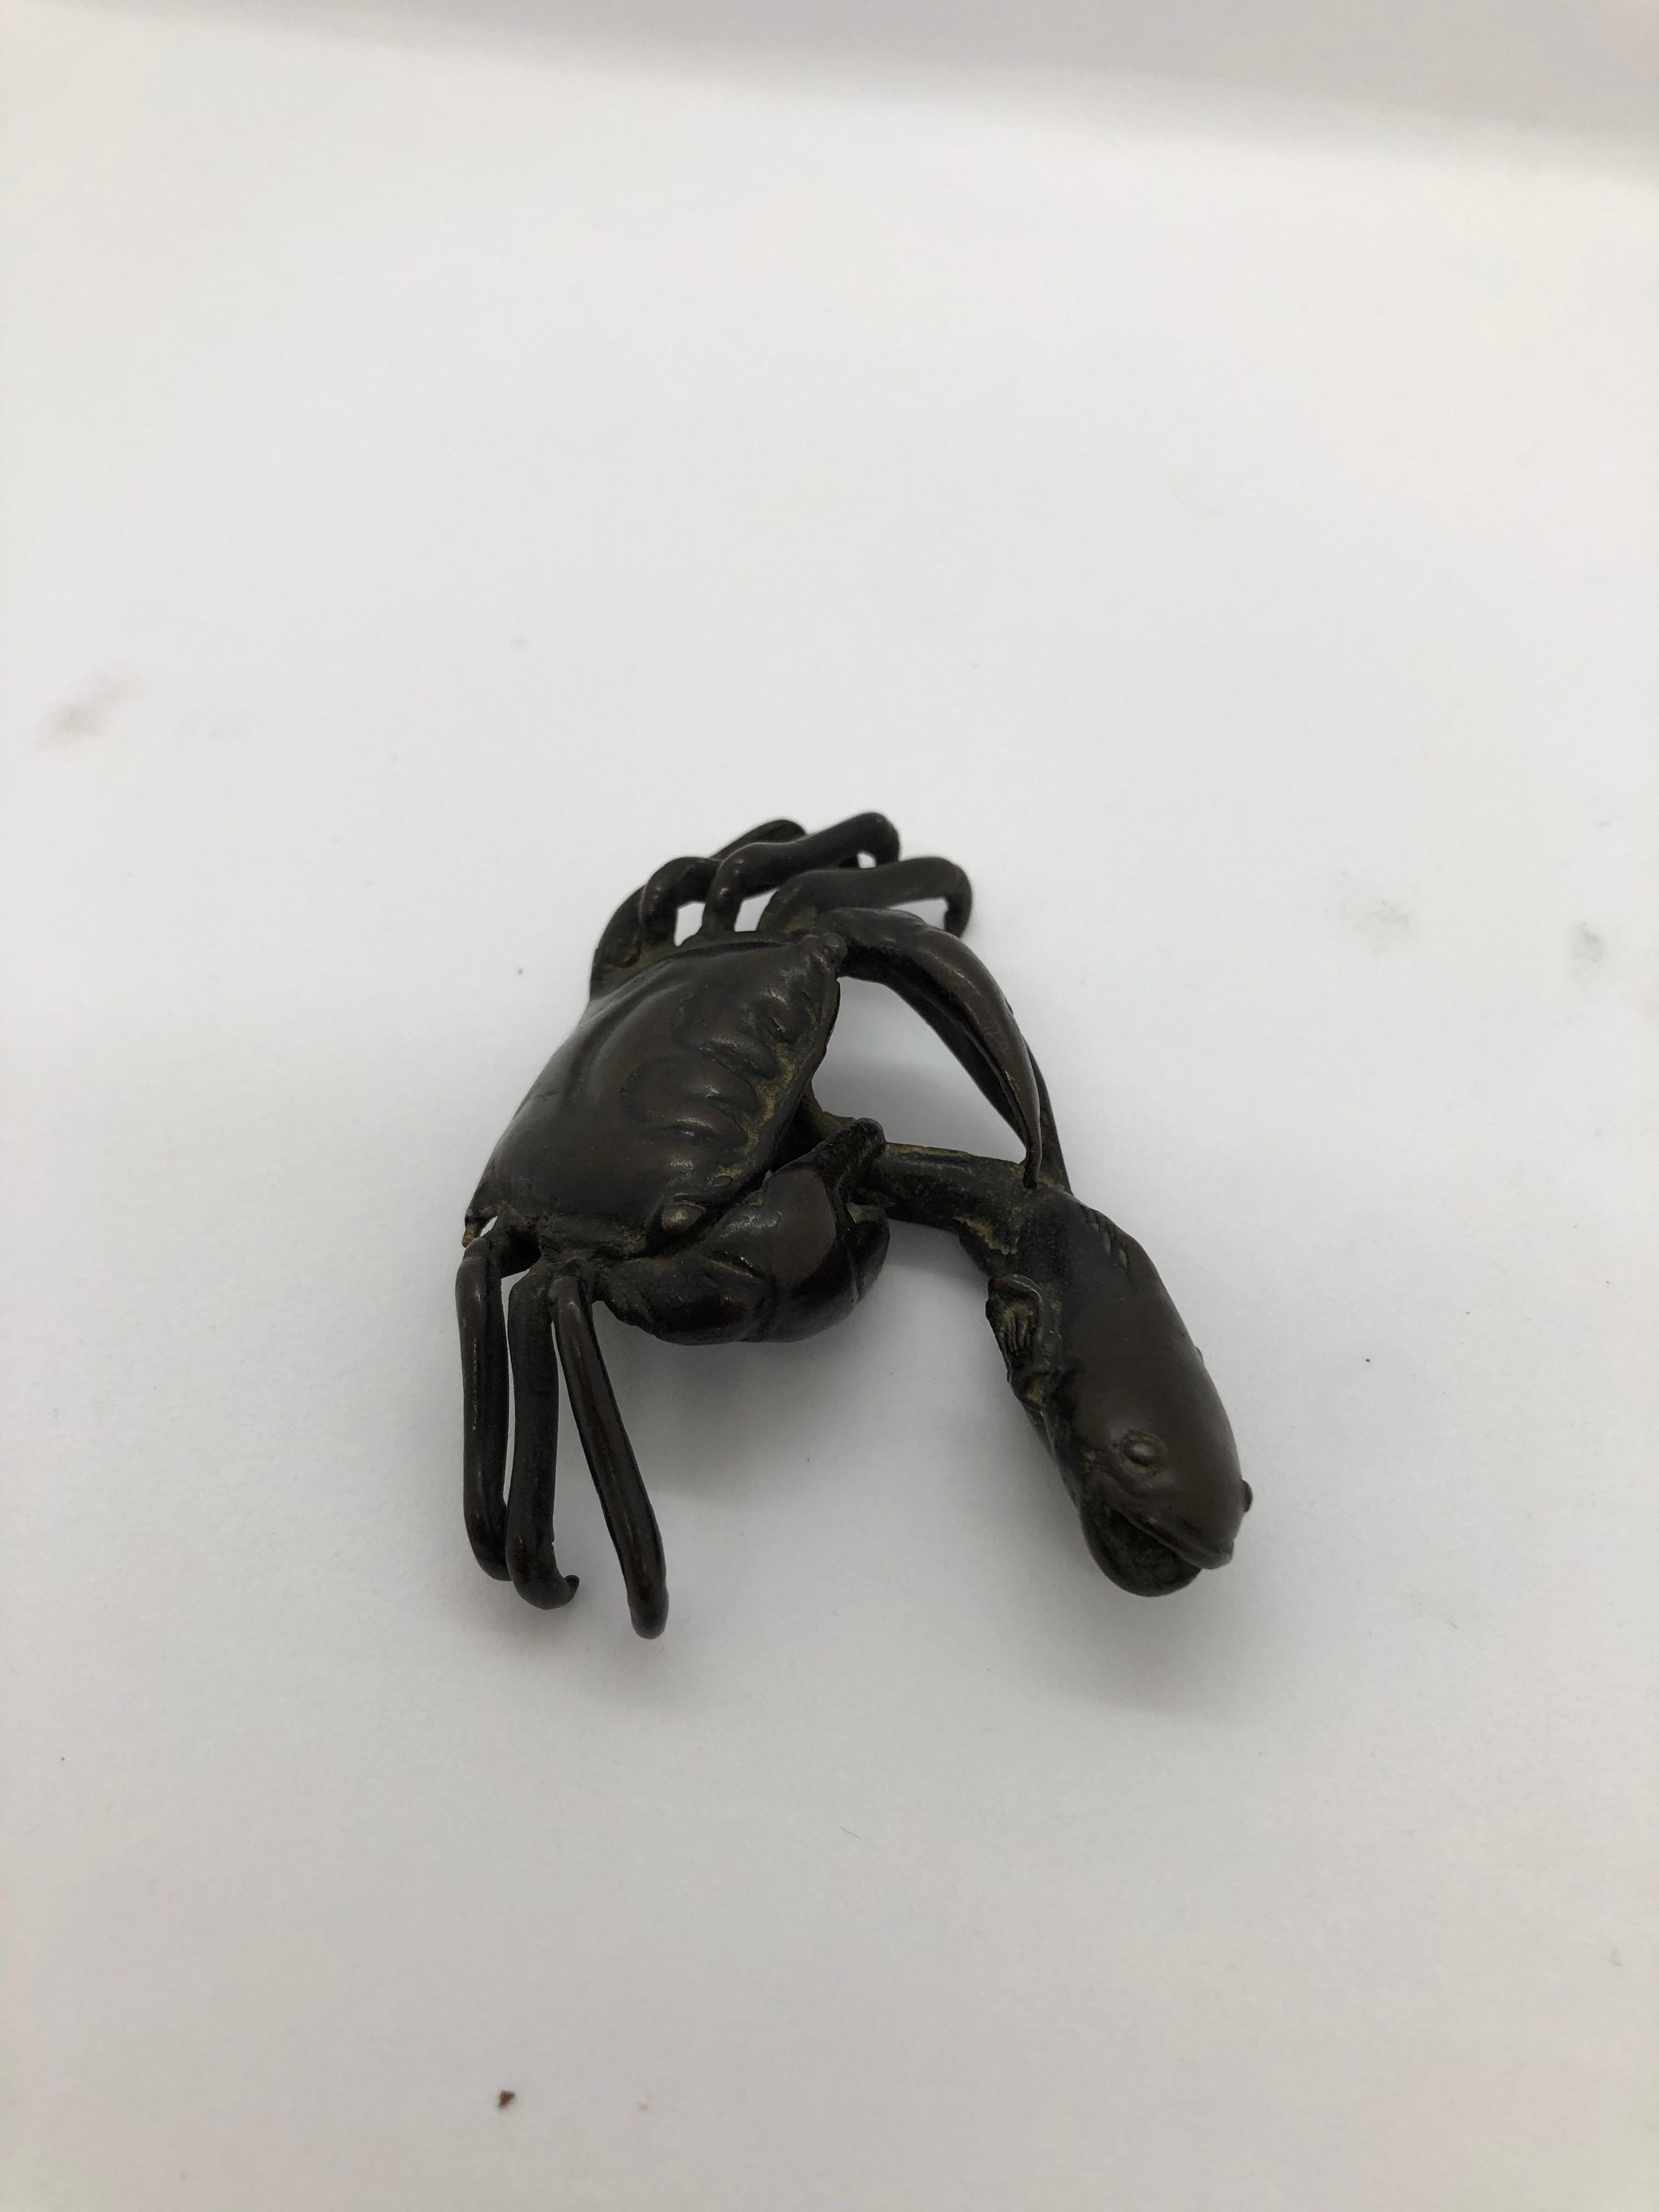 A small bronce sculpture depicting a crab catching a fish. Japanese, late 19th century.